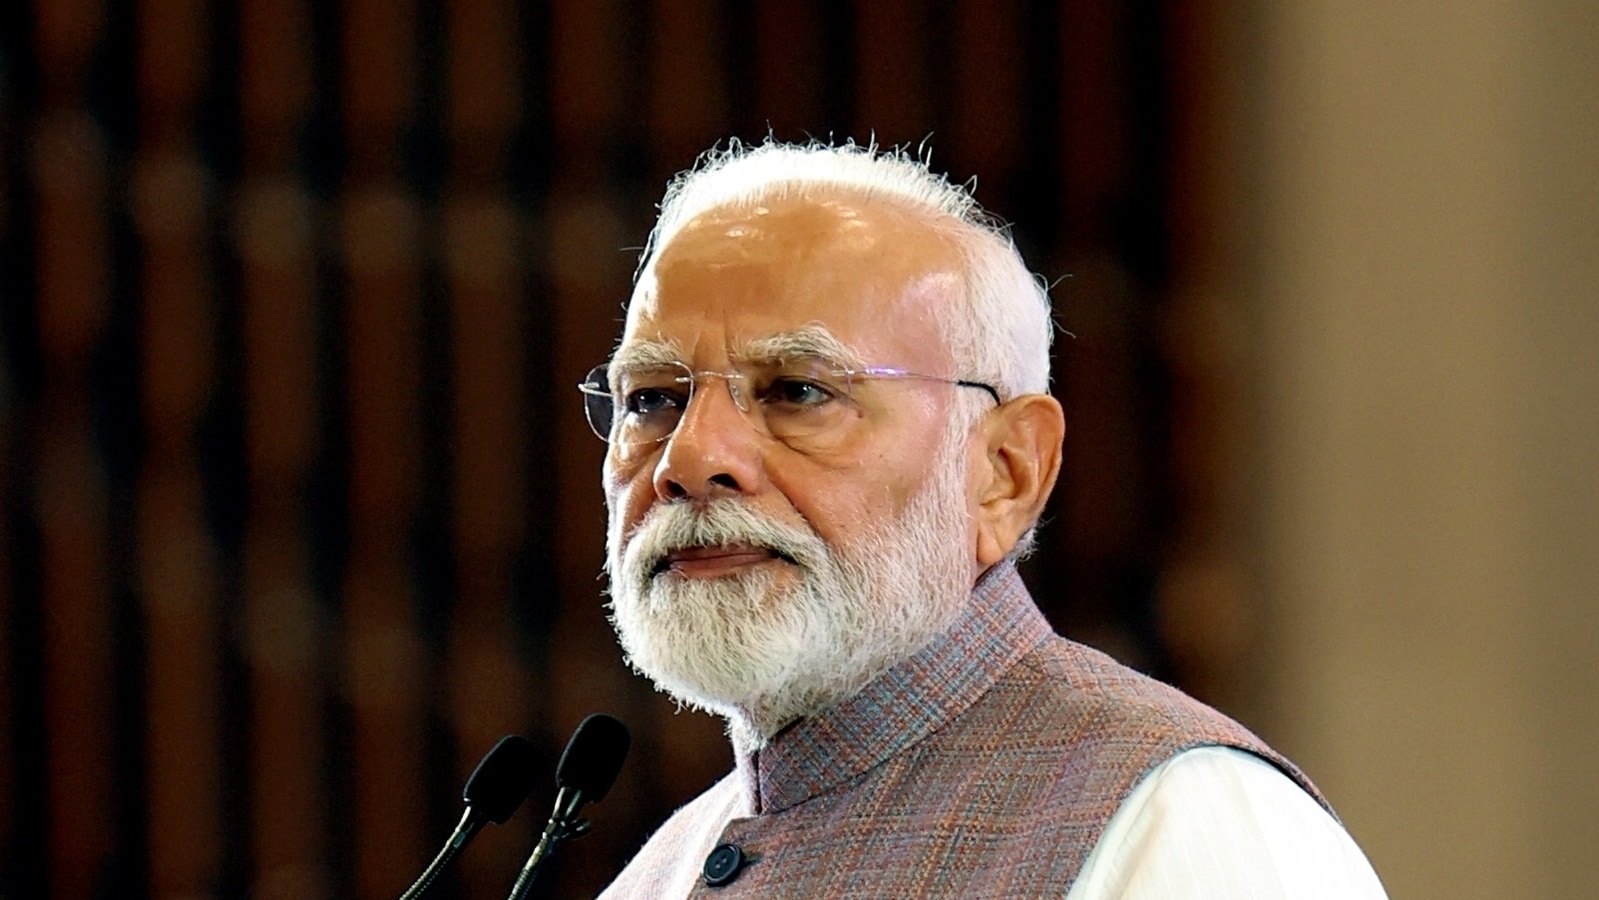 PM Modi to chair NITI Aayog meeting today: Who is attending, who’s skipping | Latest News India